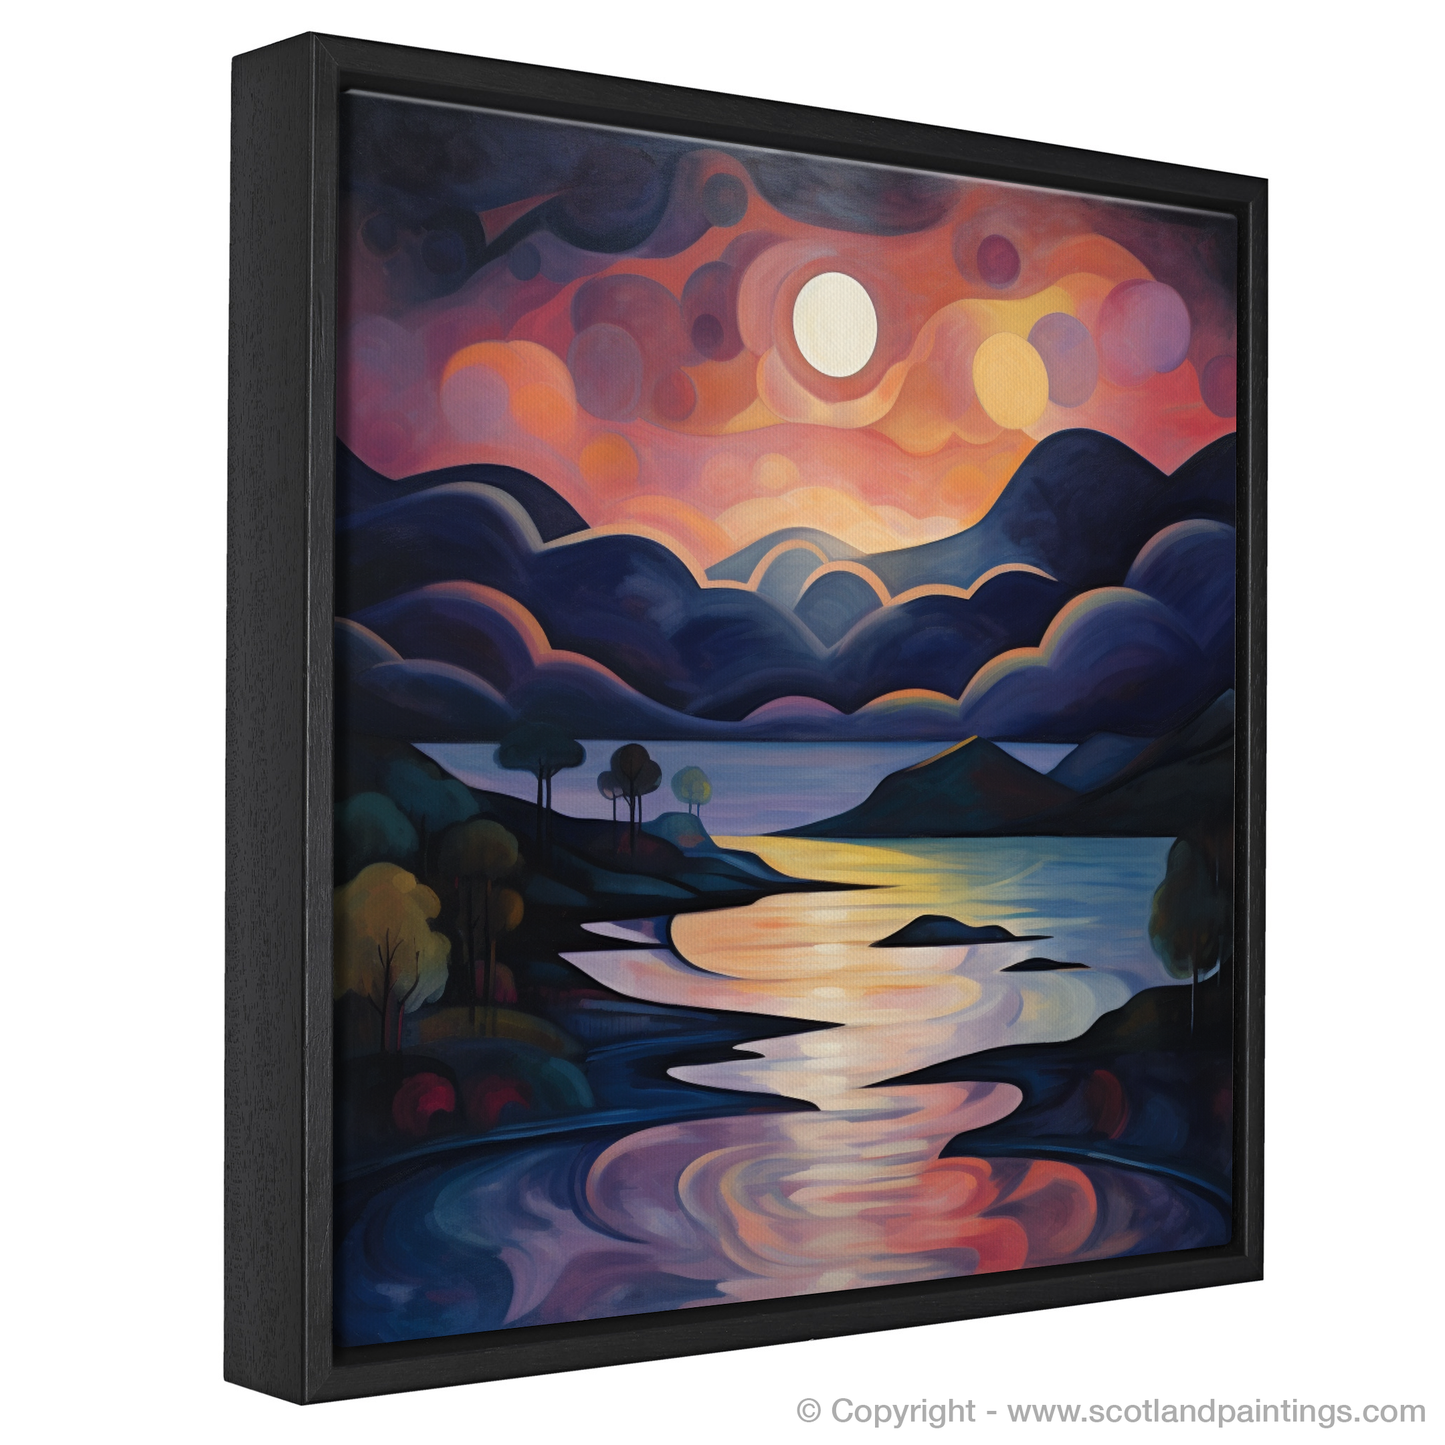 Painting and Art Print of Twilight reflections on Loch Lomond entitled "Twilight Dreamscape of Loch Lomond".